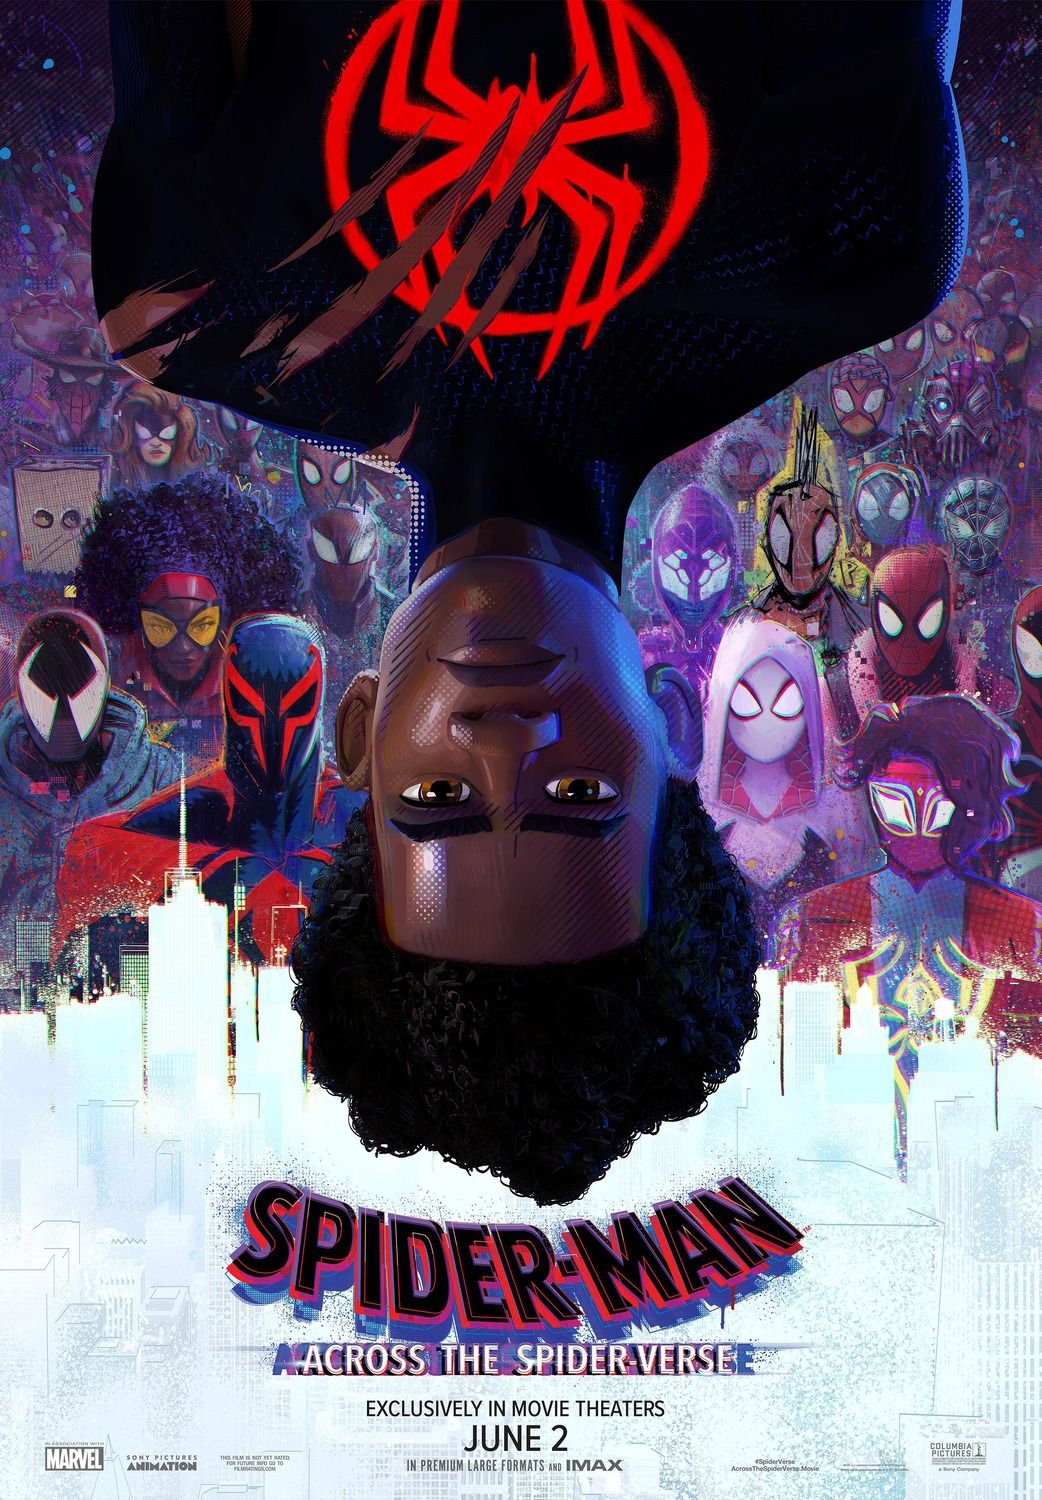 The movie poster for Spider-Man: Across the Spider-Verse.